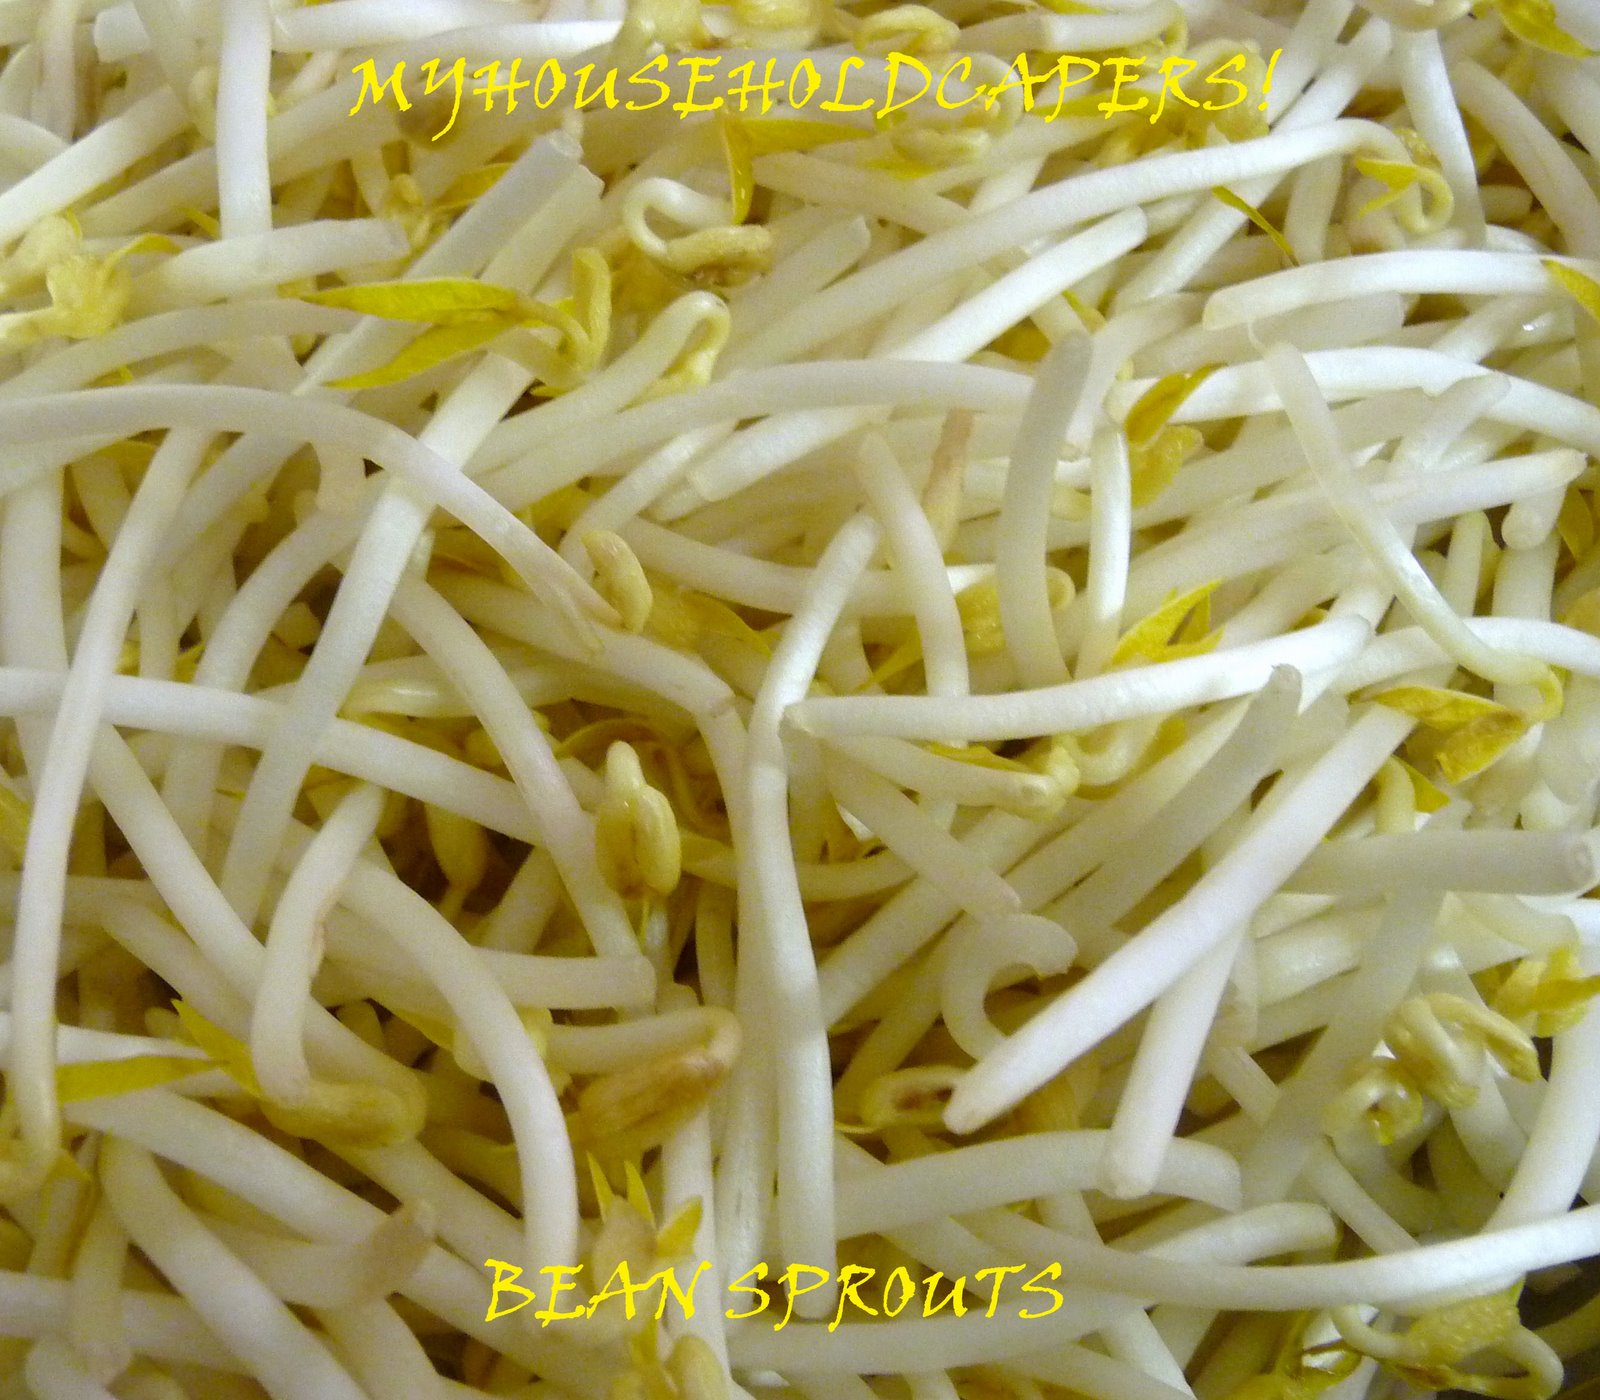 [Bean+Sprouts.jpg]